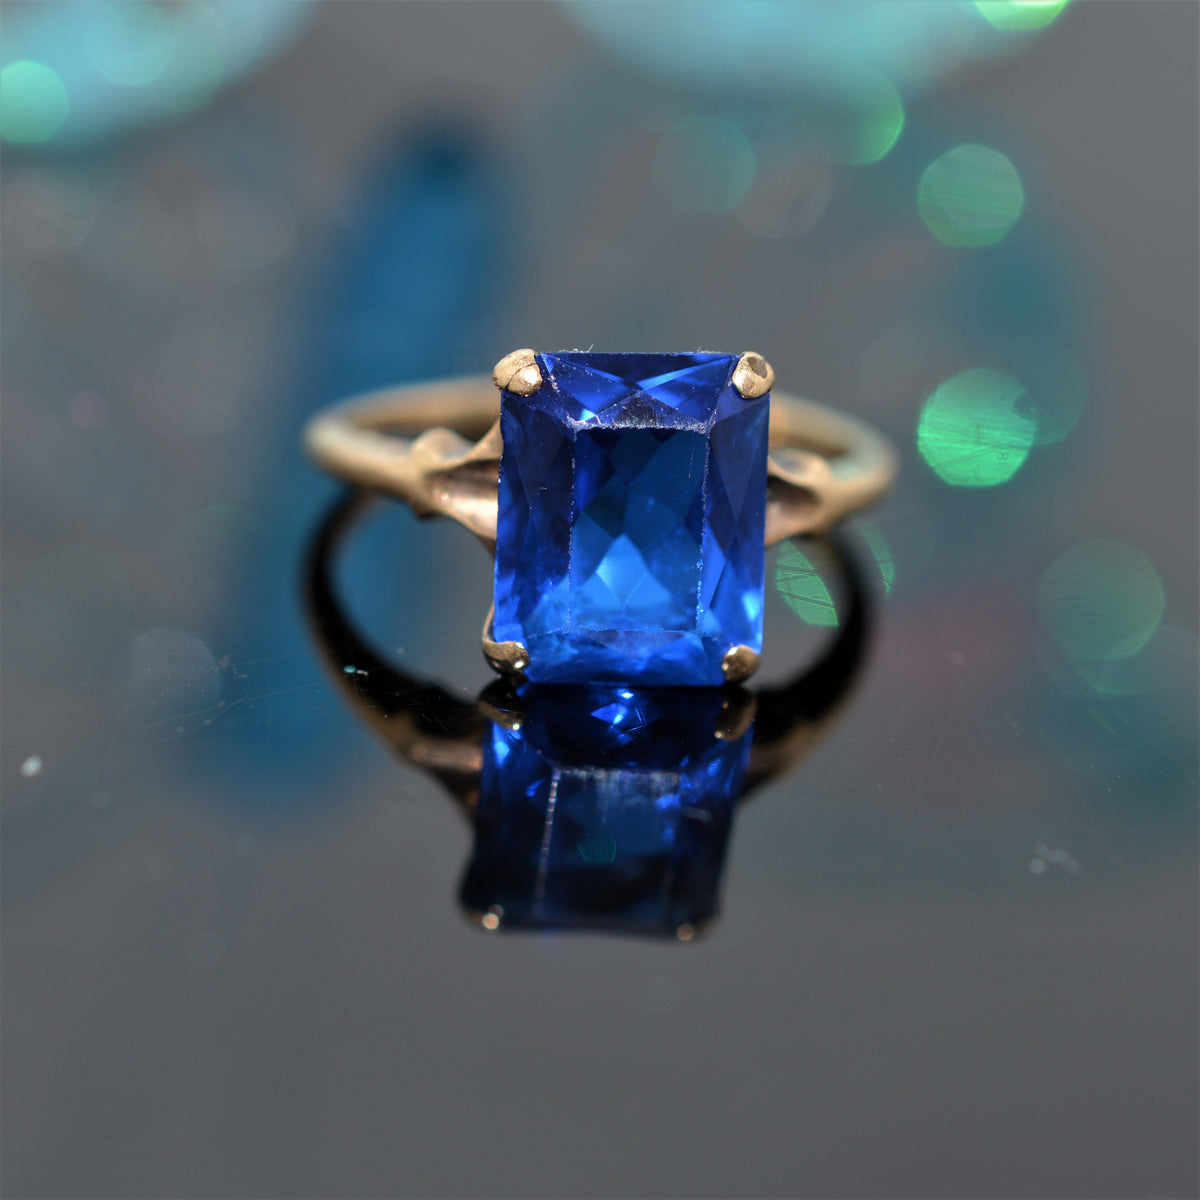 10K Yellow Gold Radiant Cut Synthetic Blue Spinel Ring by Helm &amp; Hahn